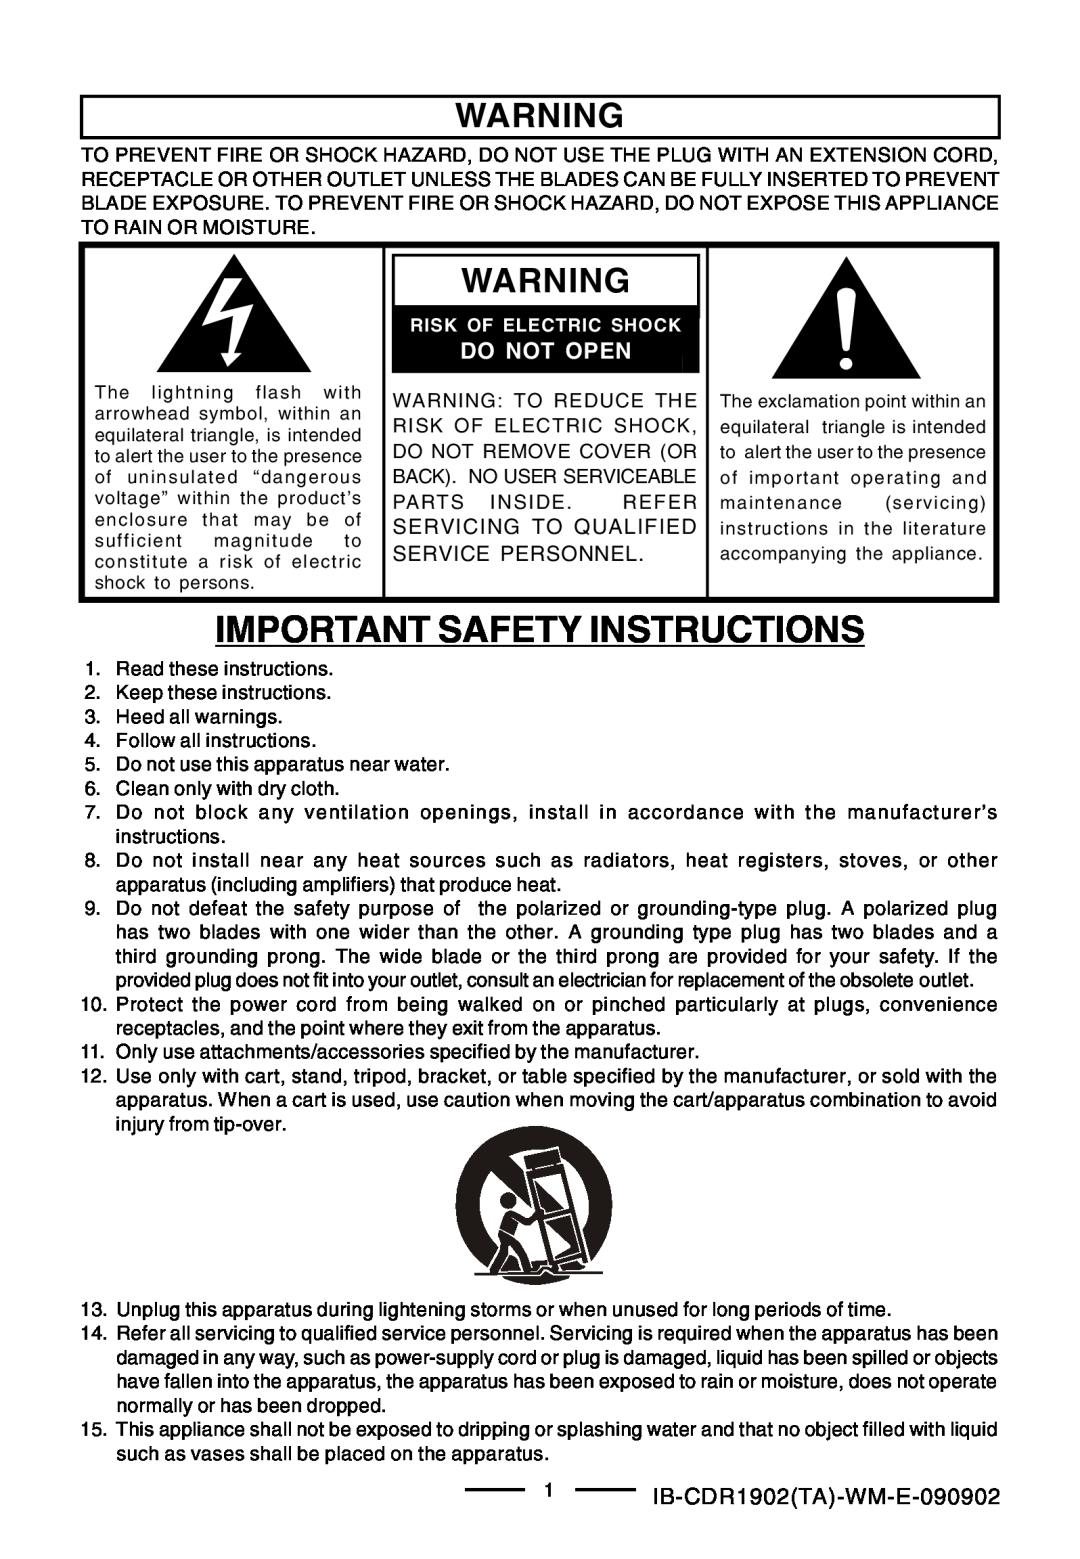 Lenoxx Electronics CDR-1902 Important Safety Instructions, Do Not Open, 1IB-CDR1902TA-WM-E-090902, Risk Of Electric Shock 